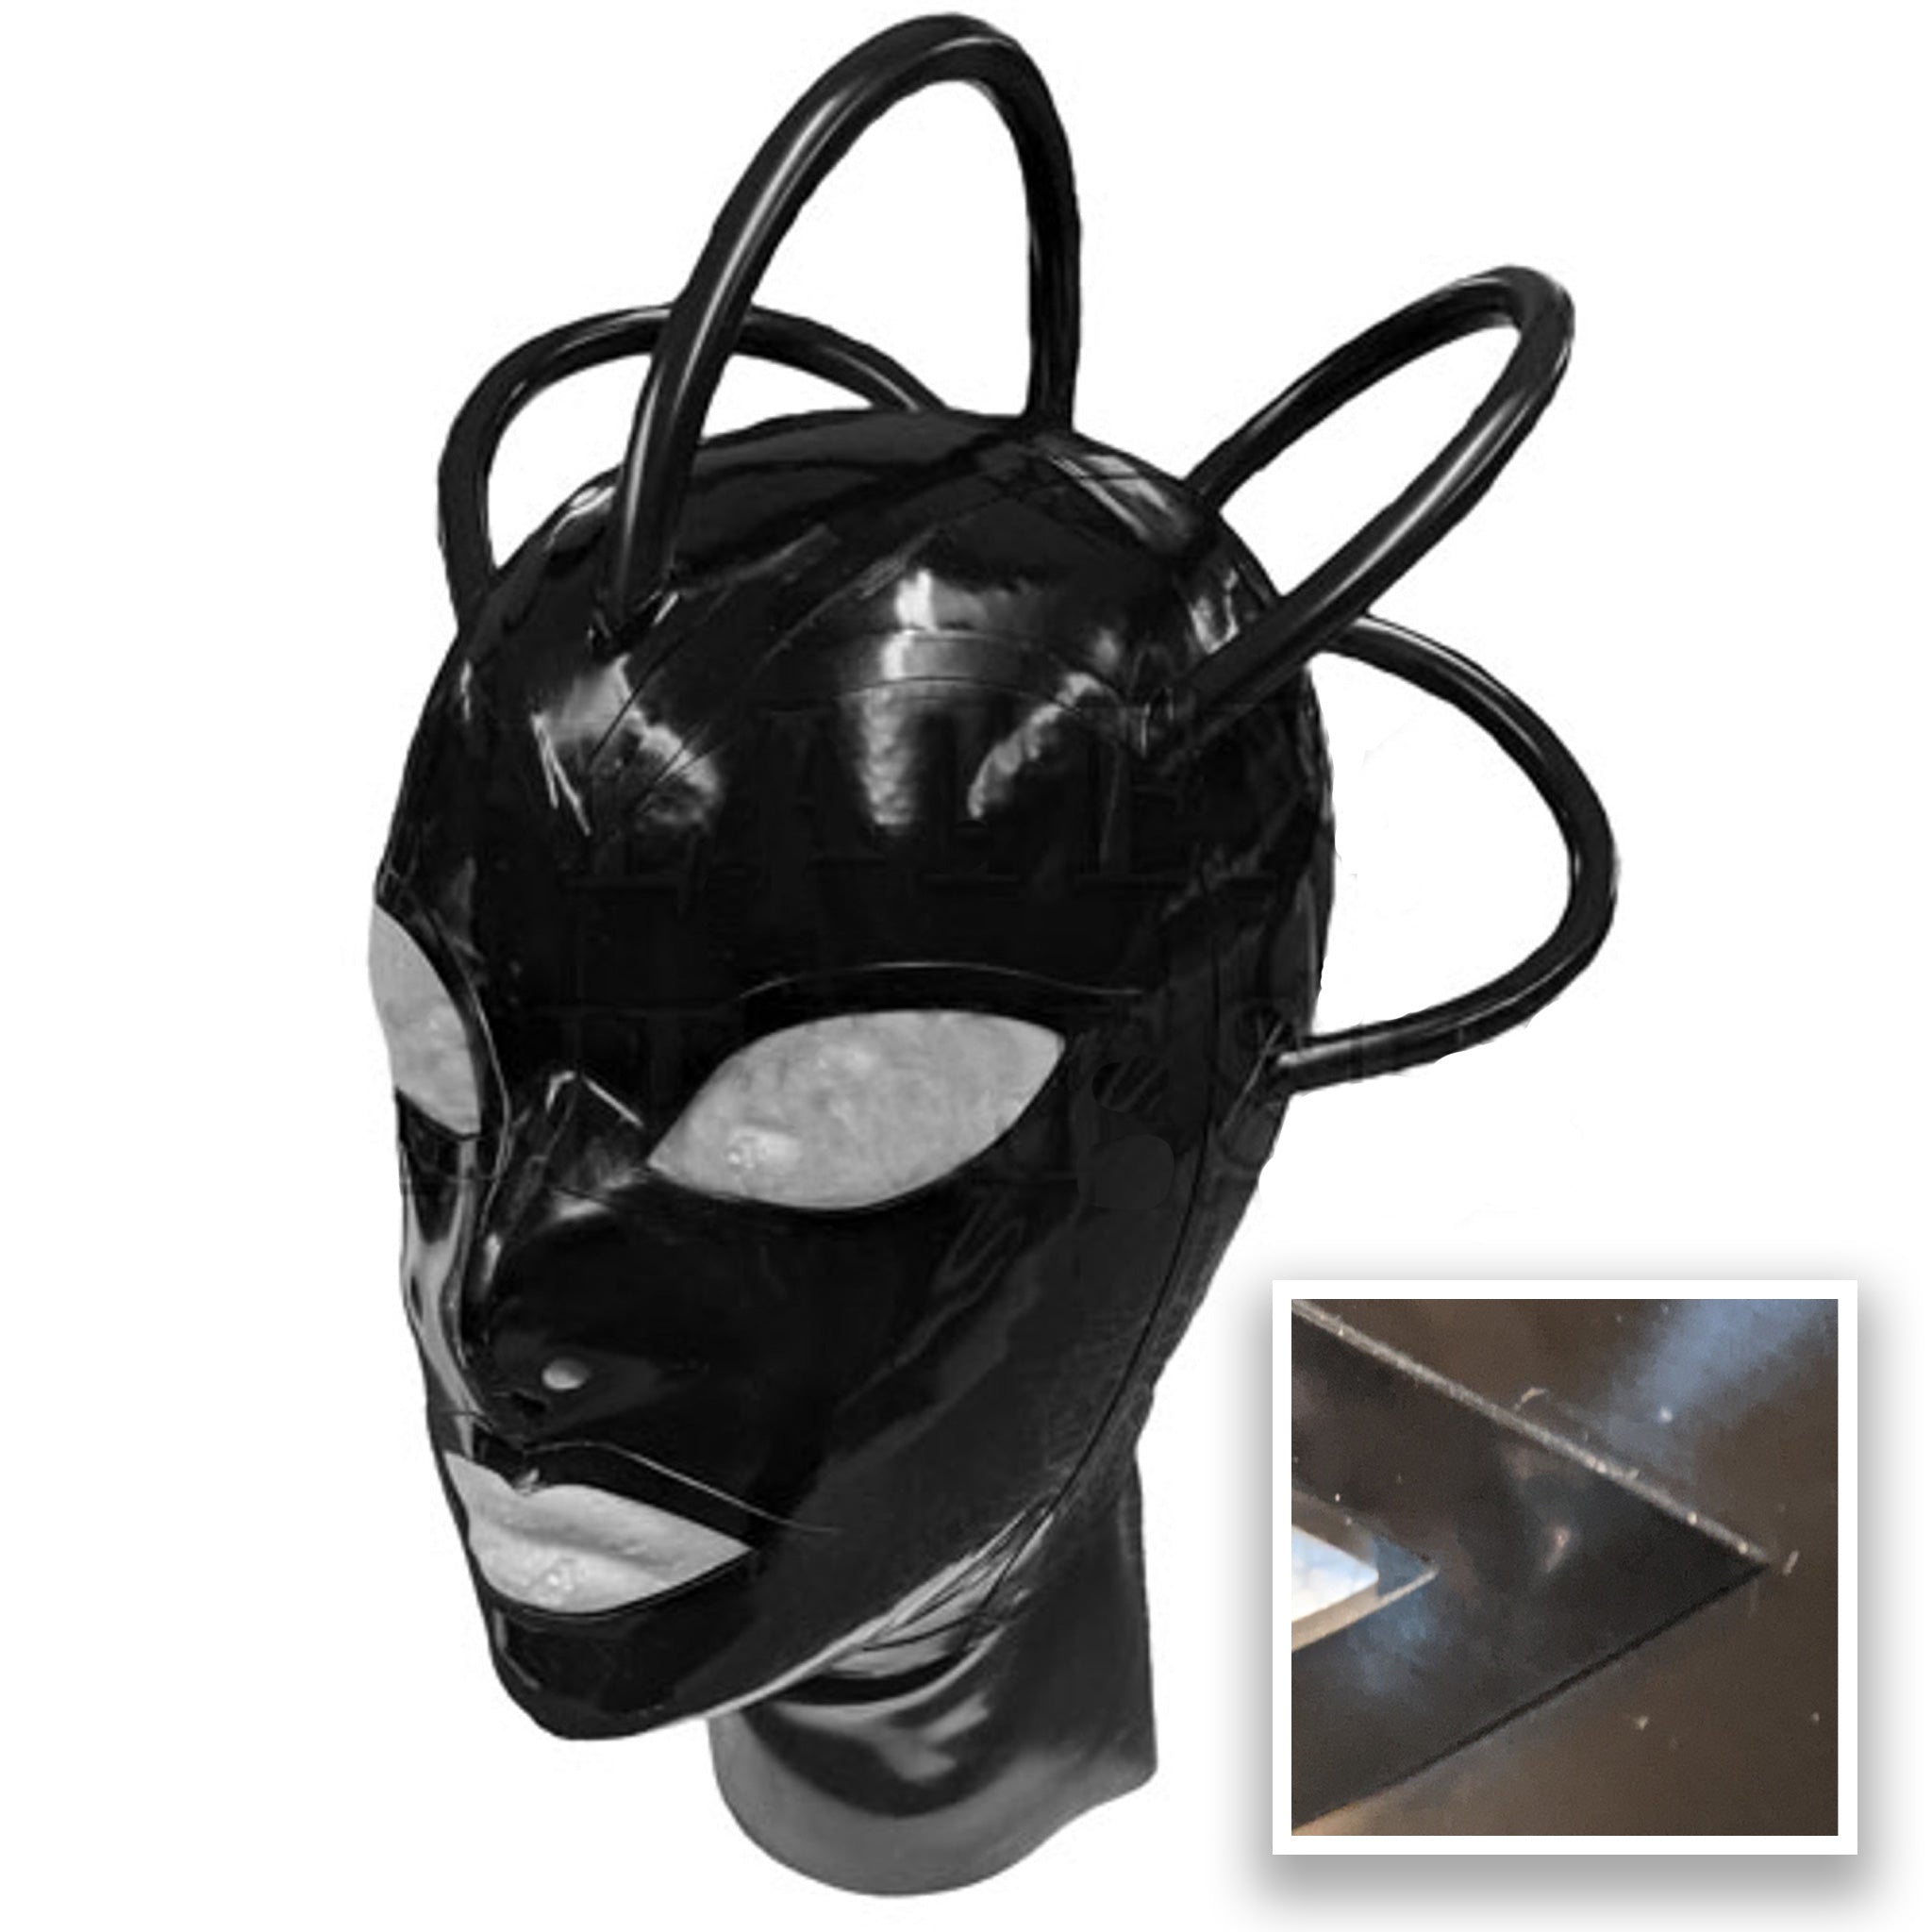 Galactic Cyborg Trimmed Latex Hood with Tubes